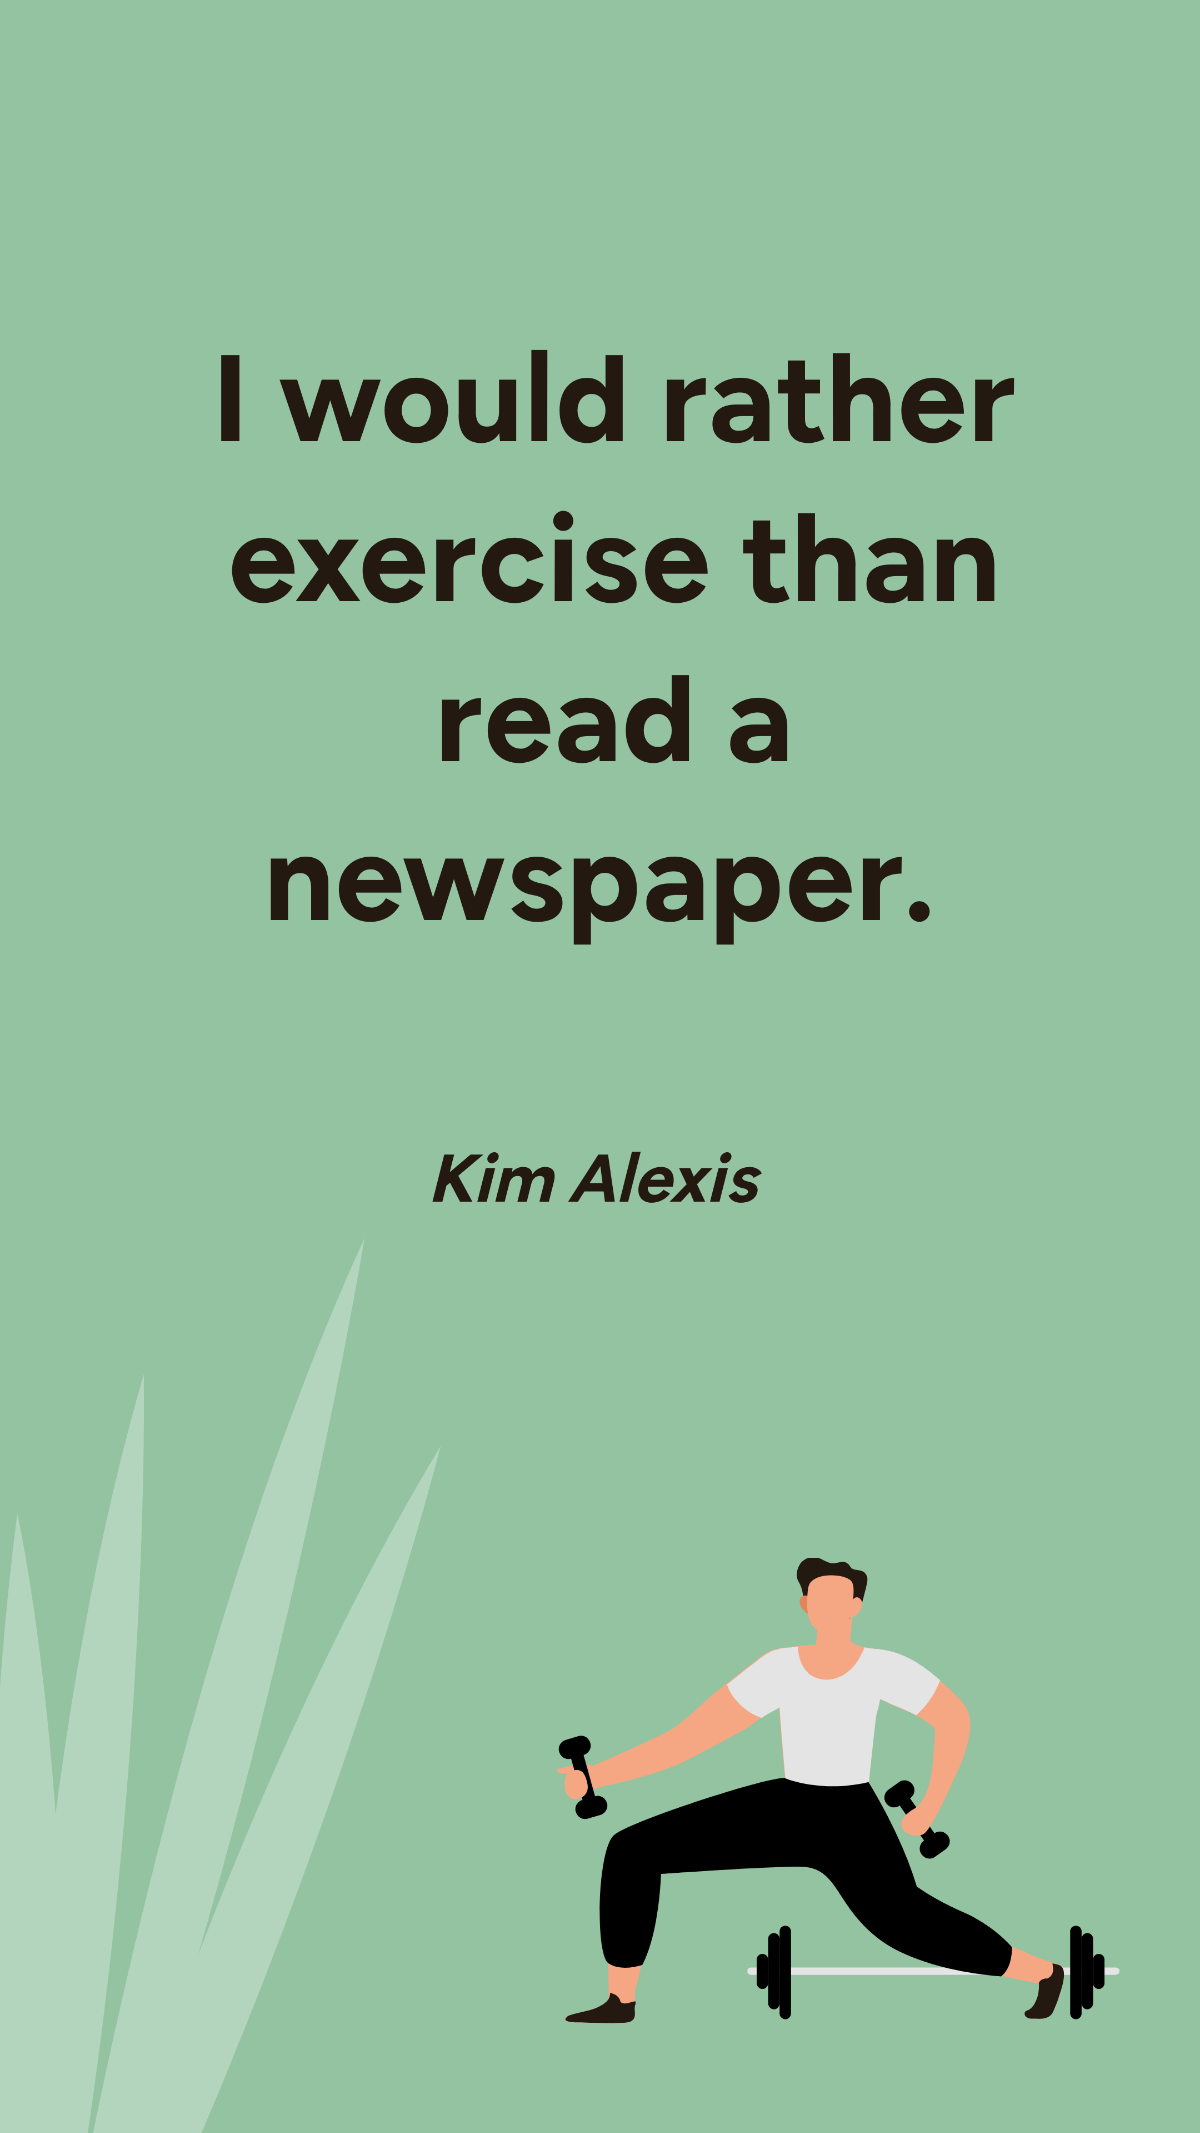 Kim Alexis - I would rather exercise than read a newspaper.